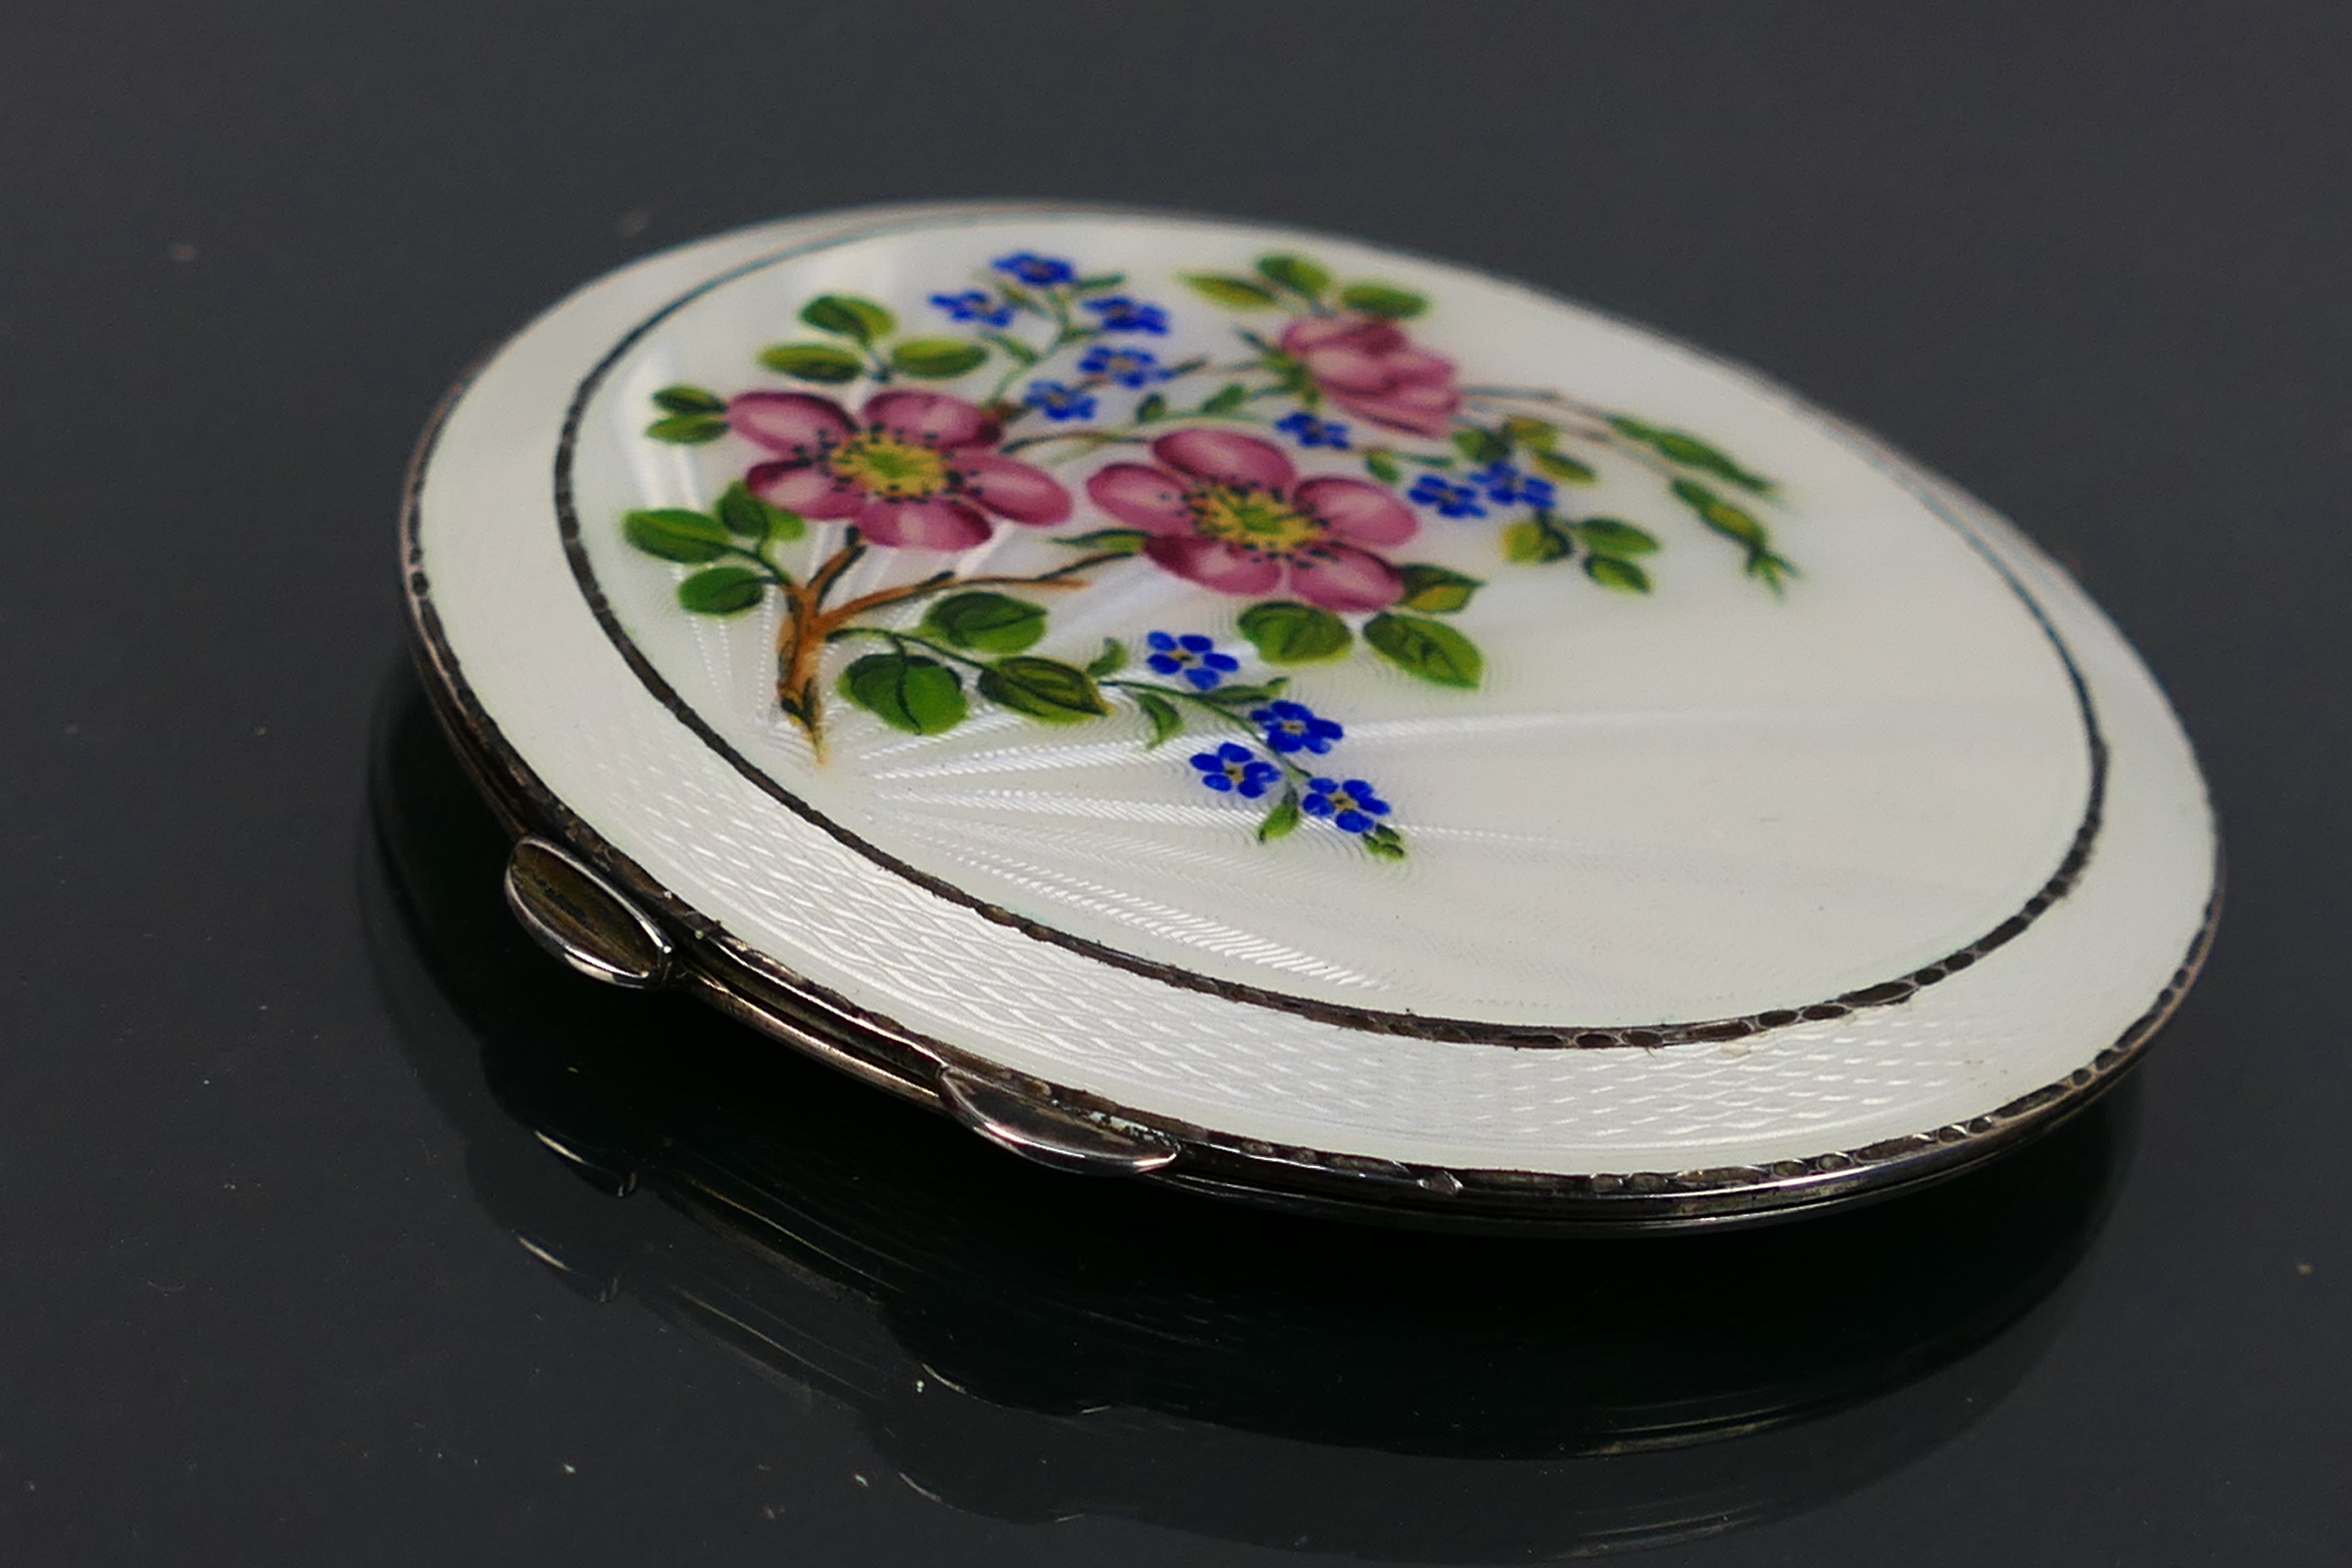 Henry Clifford Davis - A guilloche enameled powder compact with a floral display on the white - Image 3 of 10